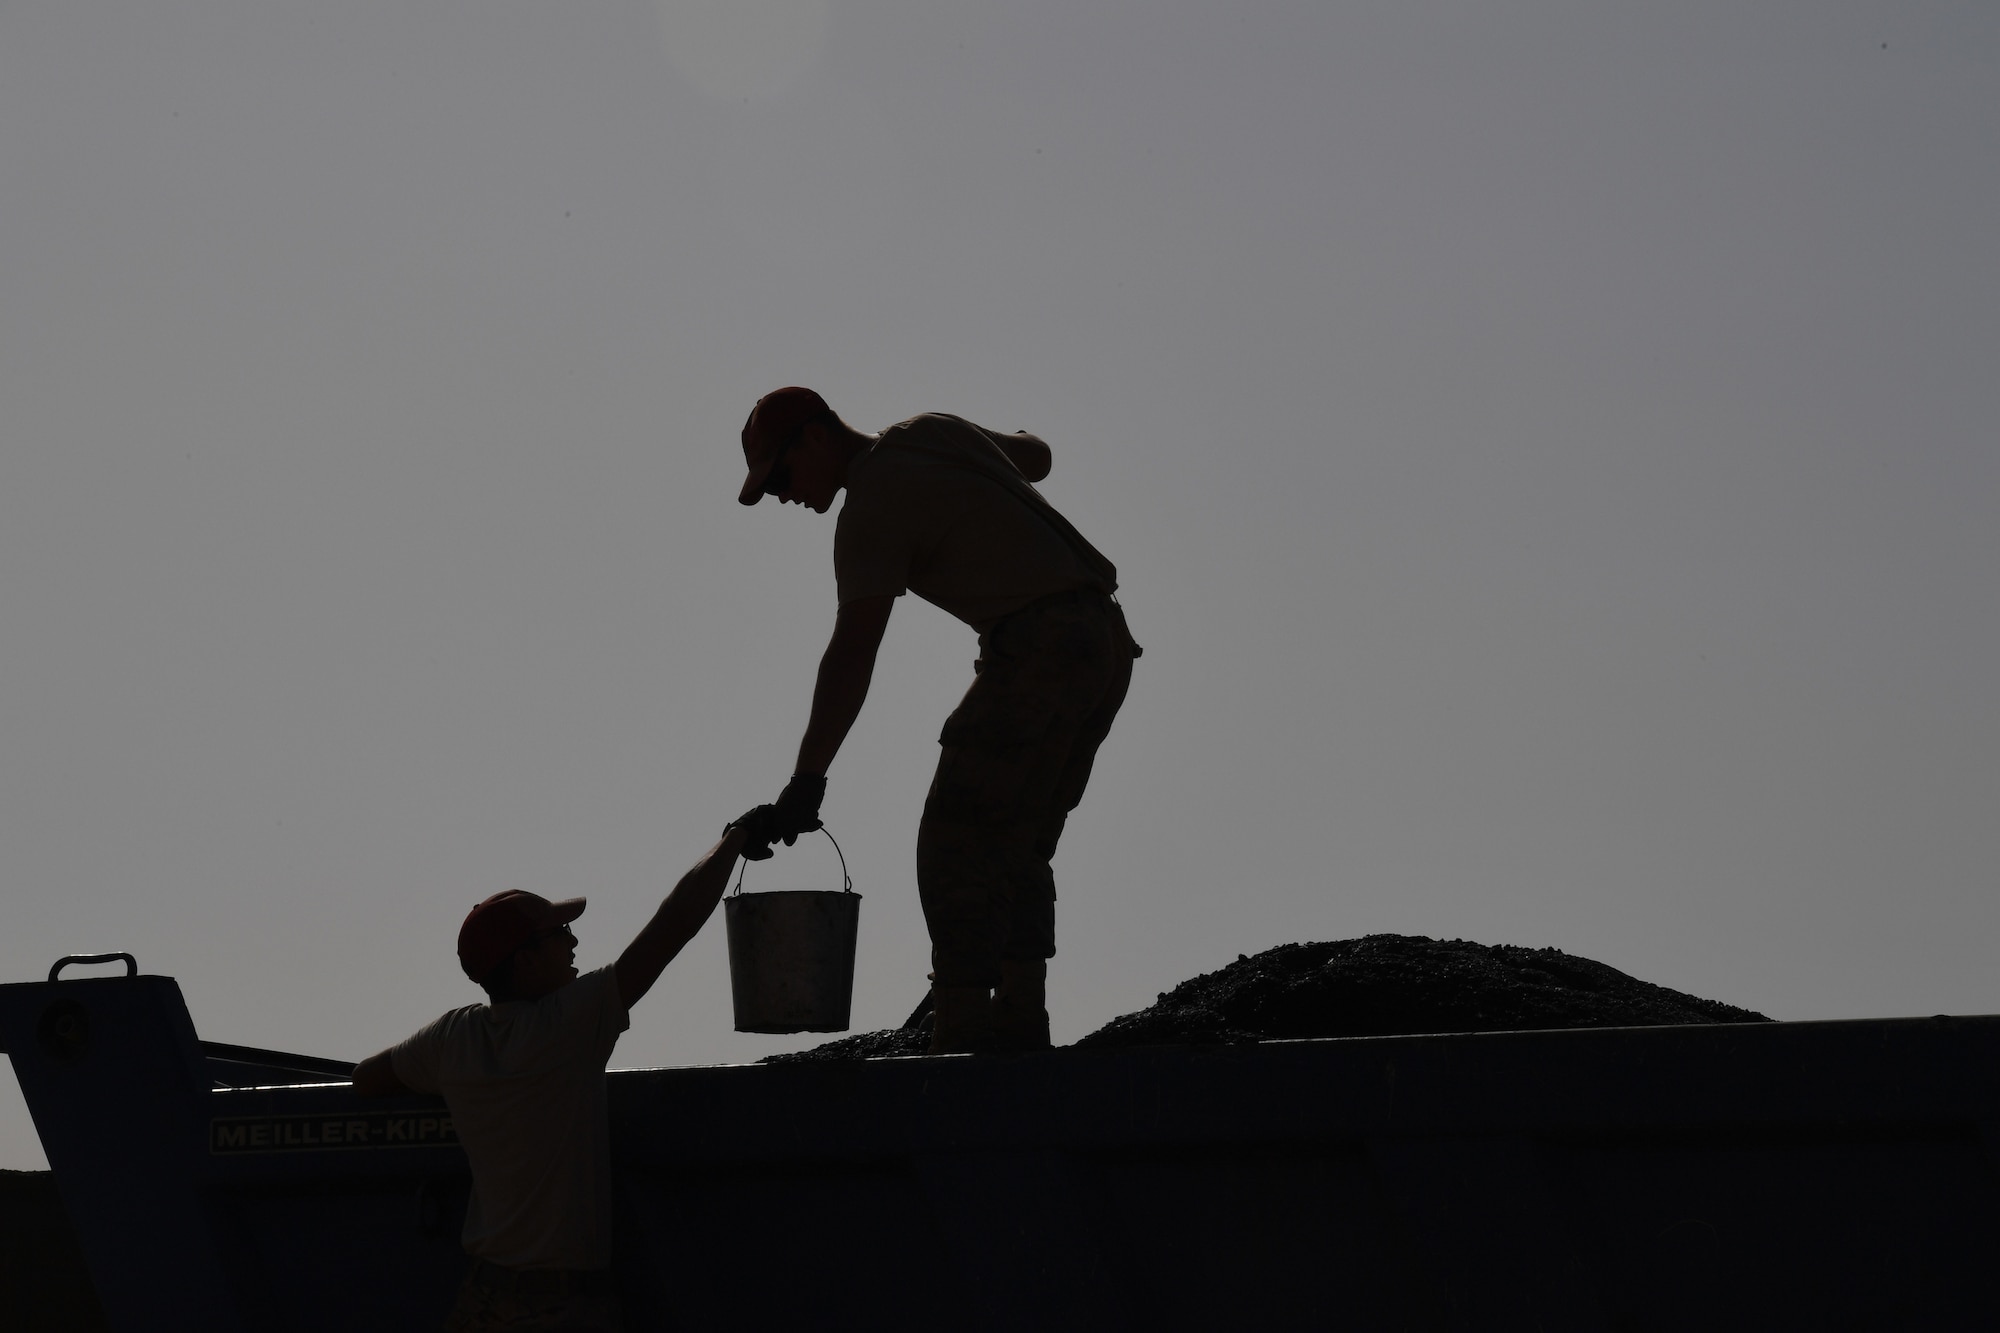 Airmen assigned to the 31st Expeditionary Rapid Engineer Deployable Heavy Operation Repair Squadron Engineer Squadron collect a sample of asphalt prior to paving a test road on Nigerien Air Base 201, Niger, Oct. 19, 2018. The test allows the engineers to determine the quality of the asphalt and test the equipment before laying the runway. (U.S. Air Force photo by Tech. Sgt. Rachelle Coleman)